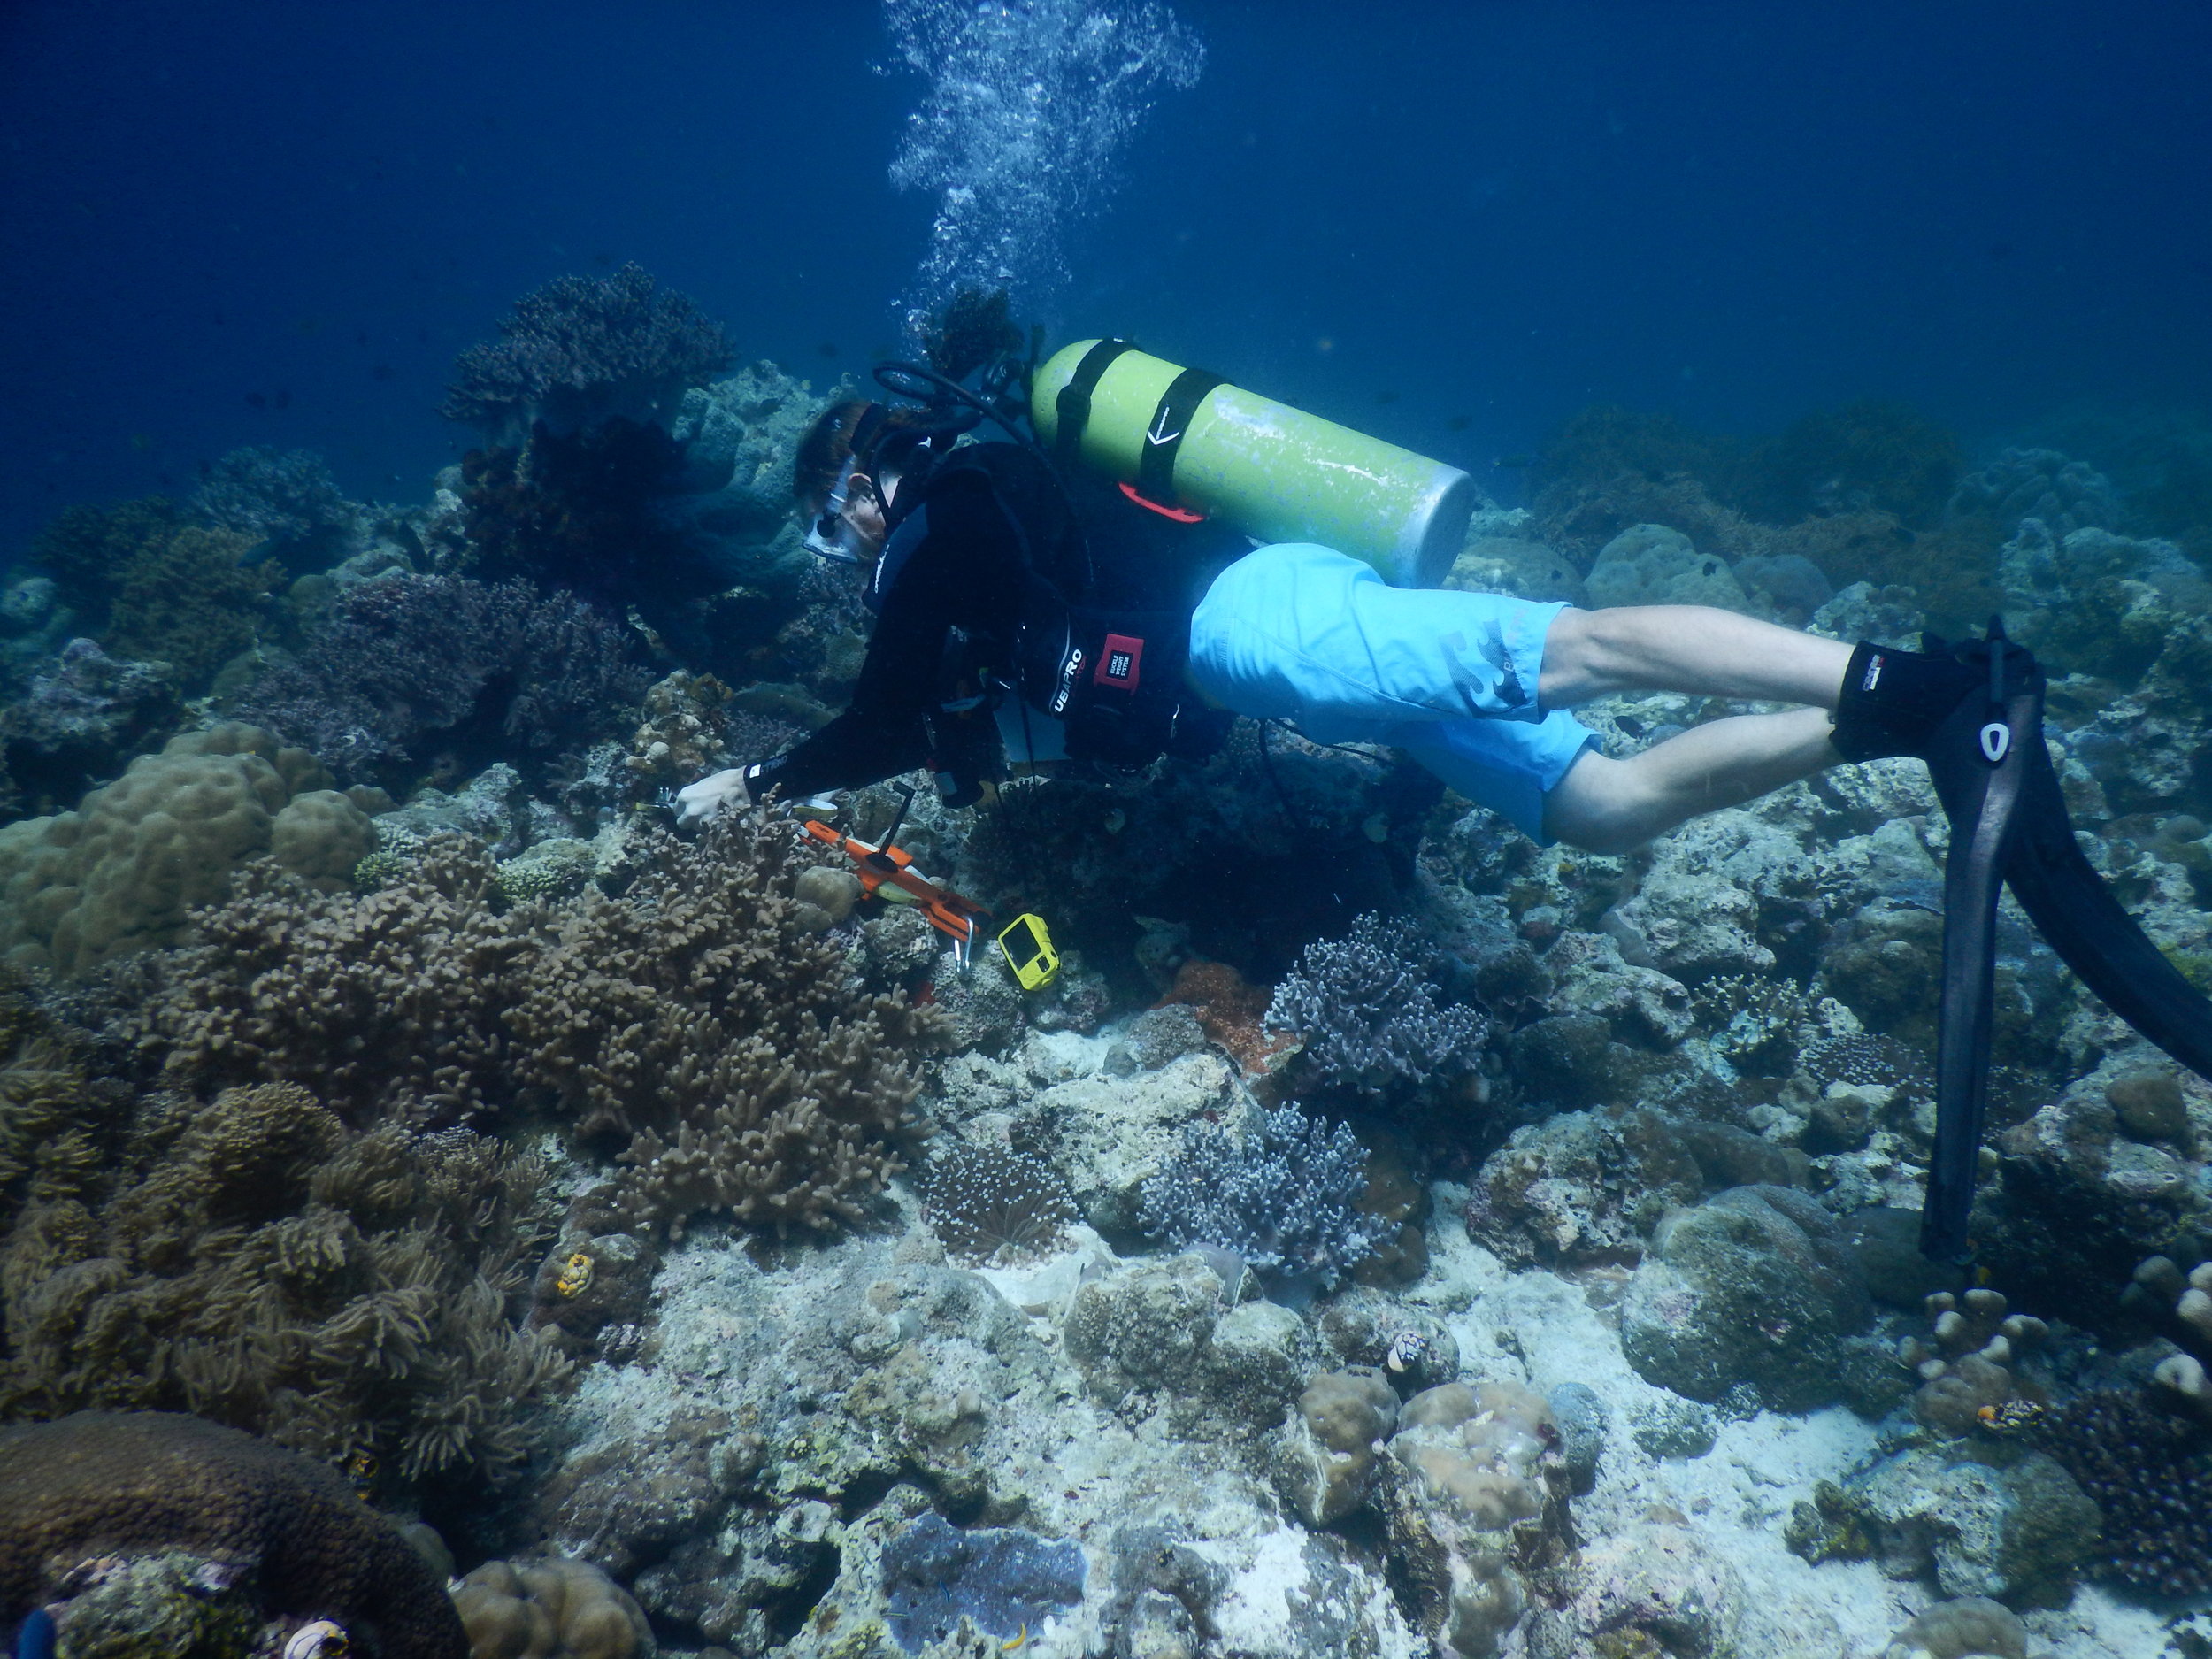 Austin laying out transect tape in Wakatobi